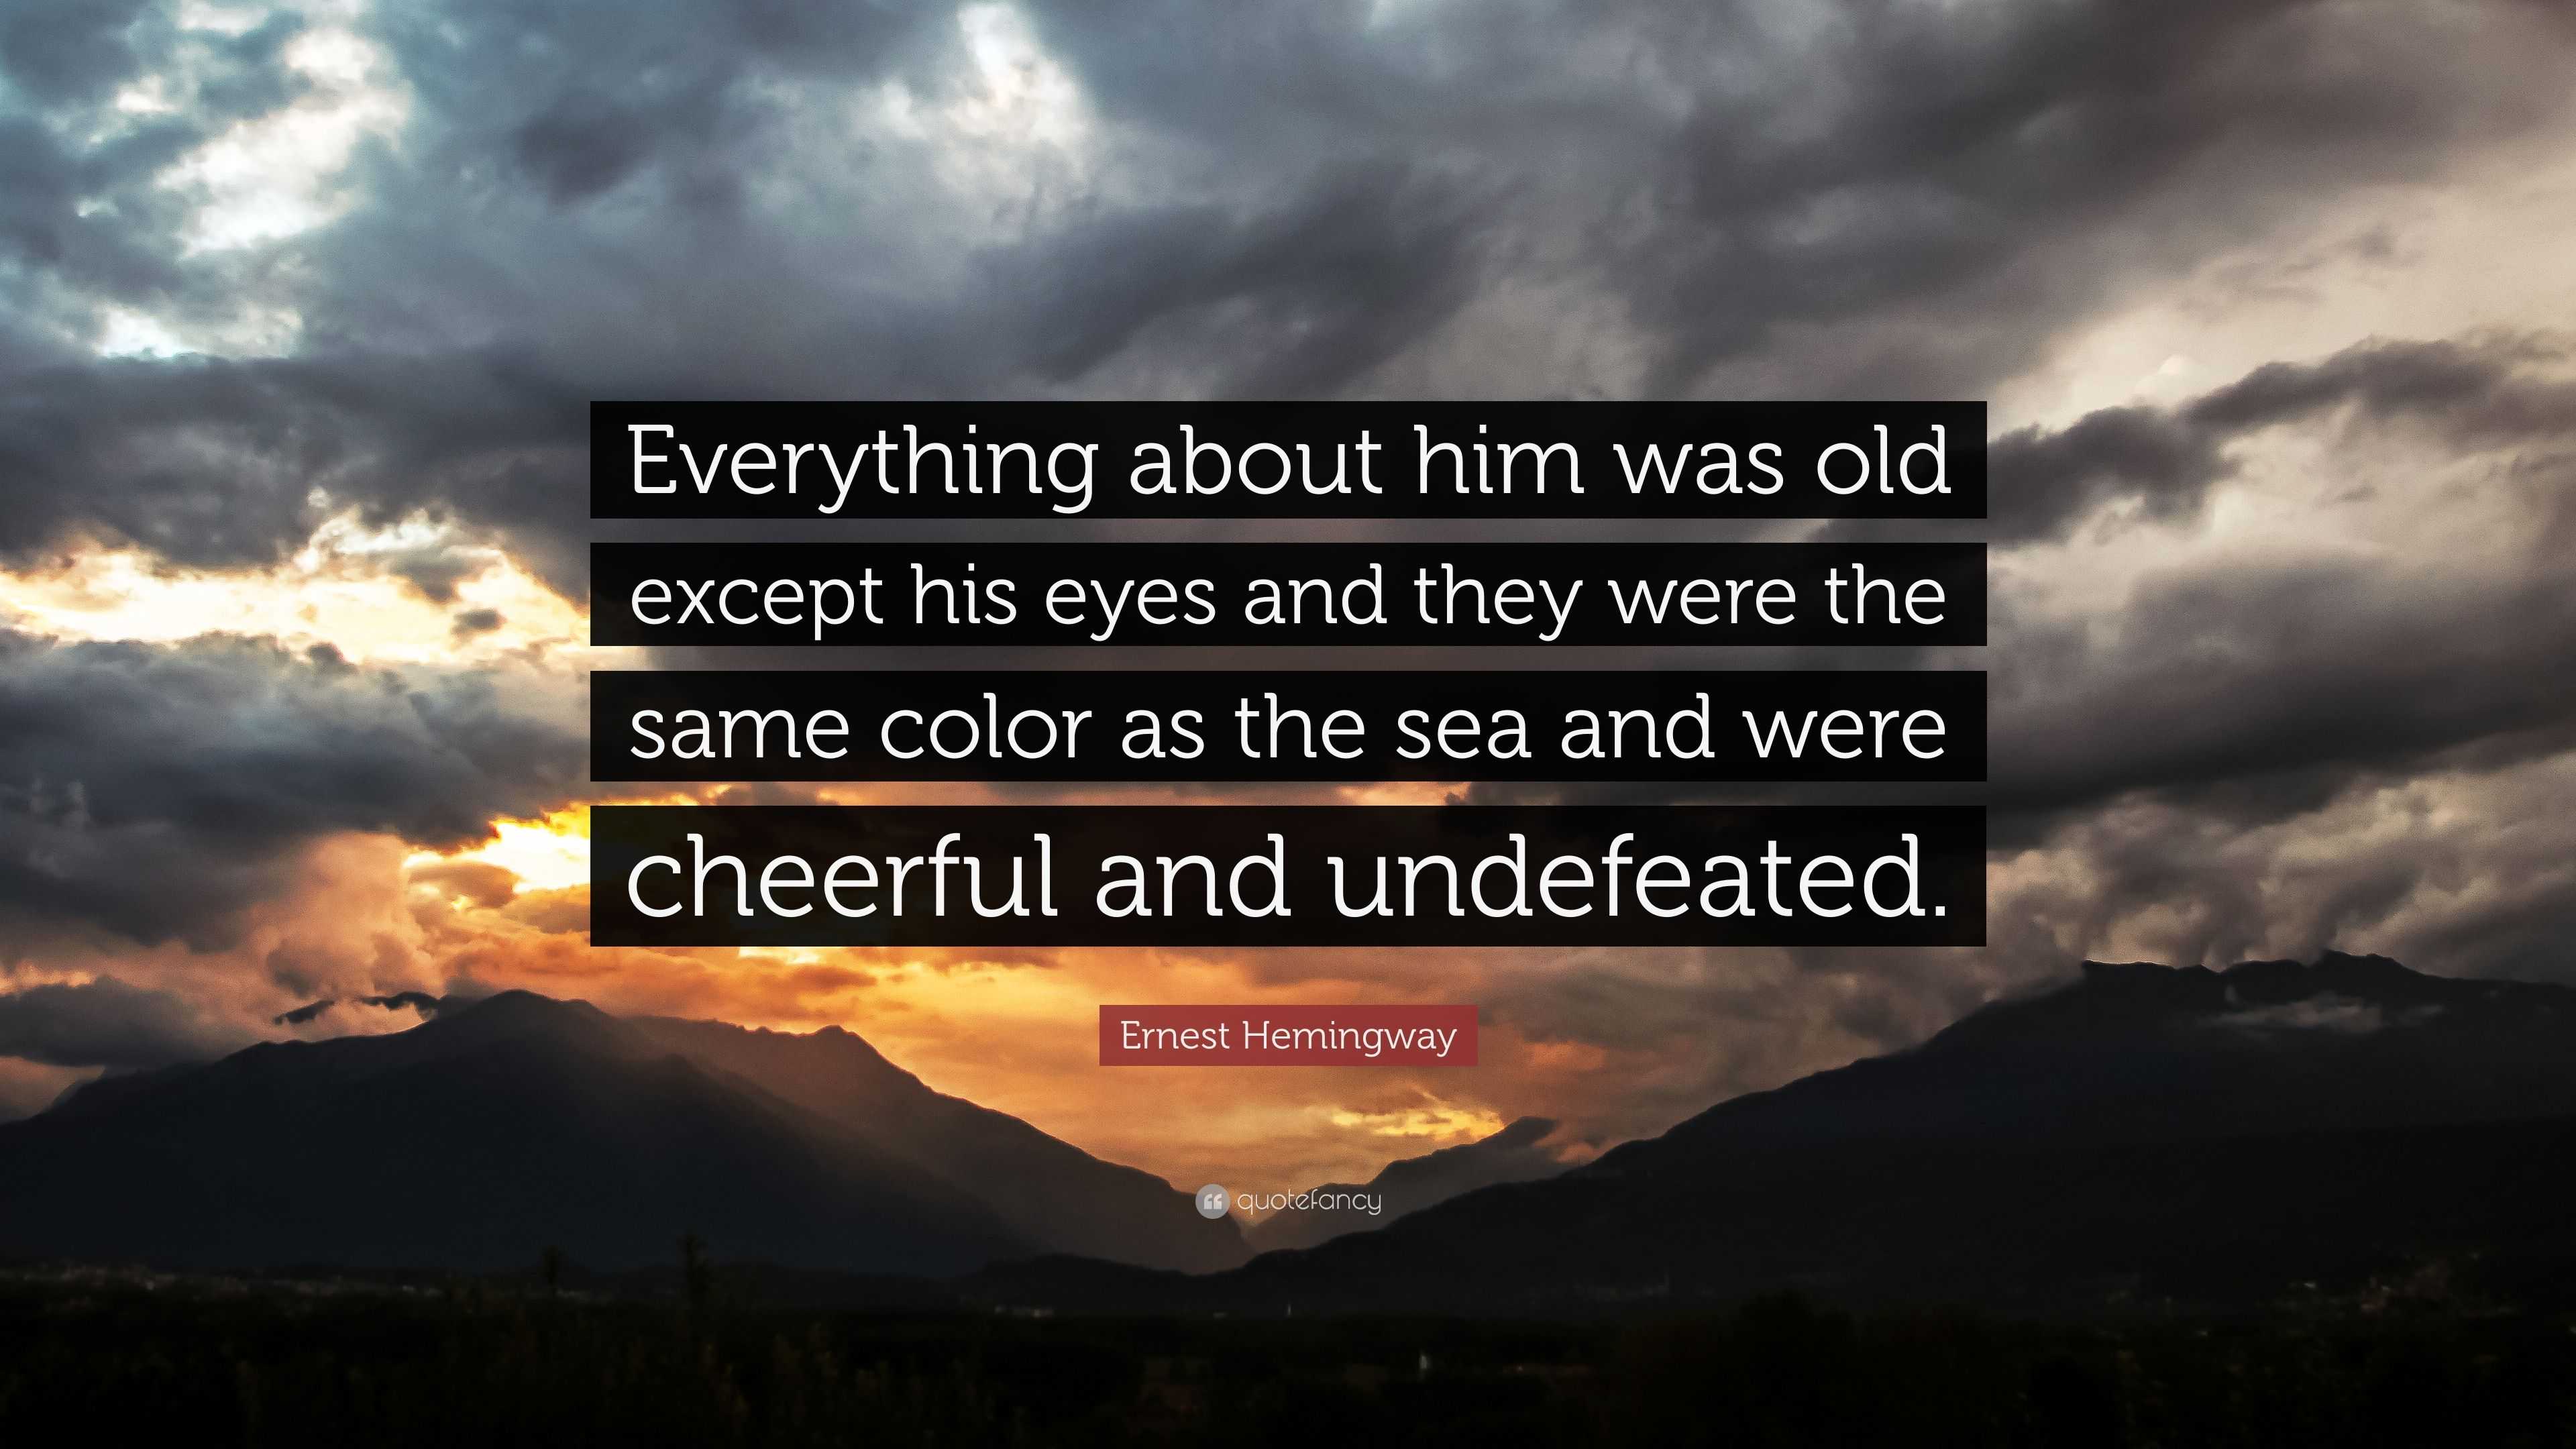 the undefeated by ernest hemingway